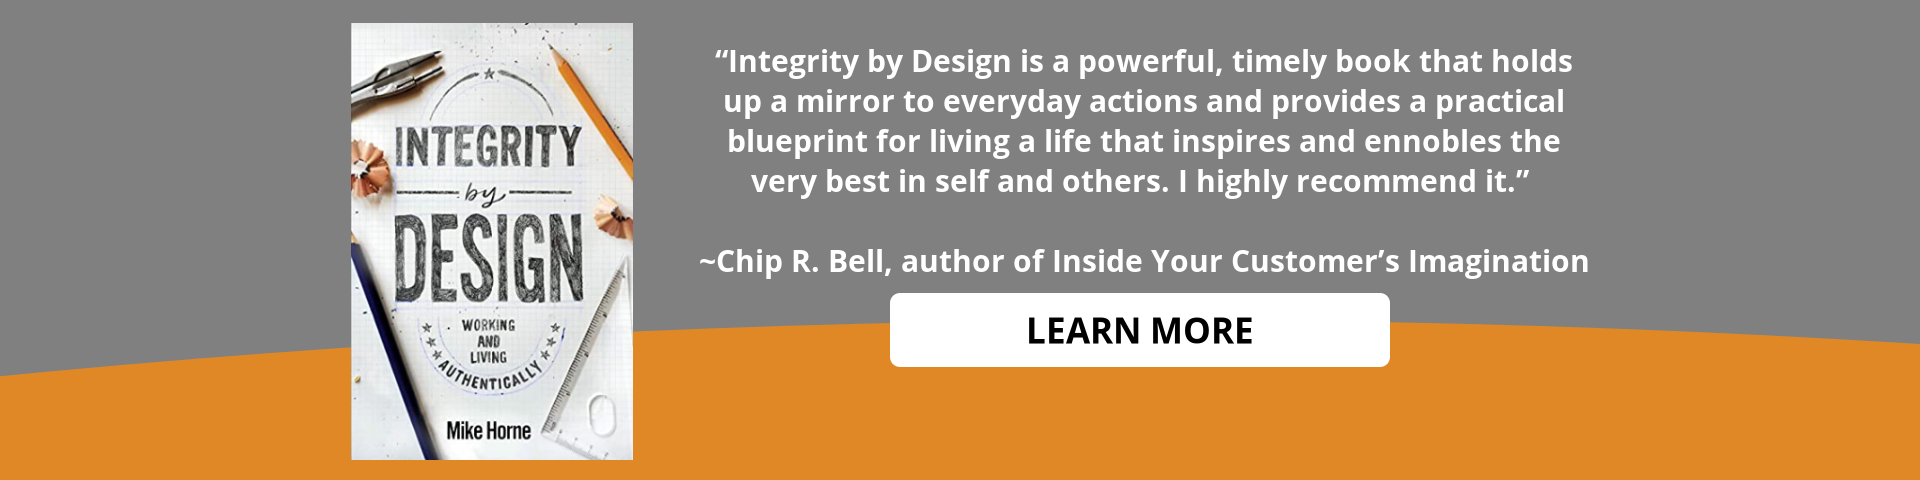 Integrity by Design by Mike Horne